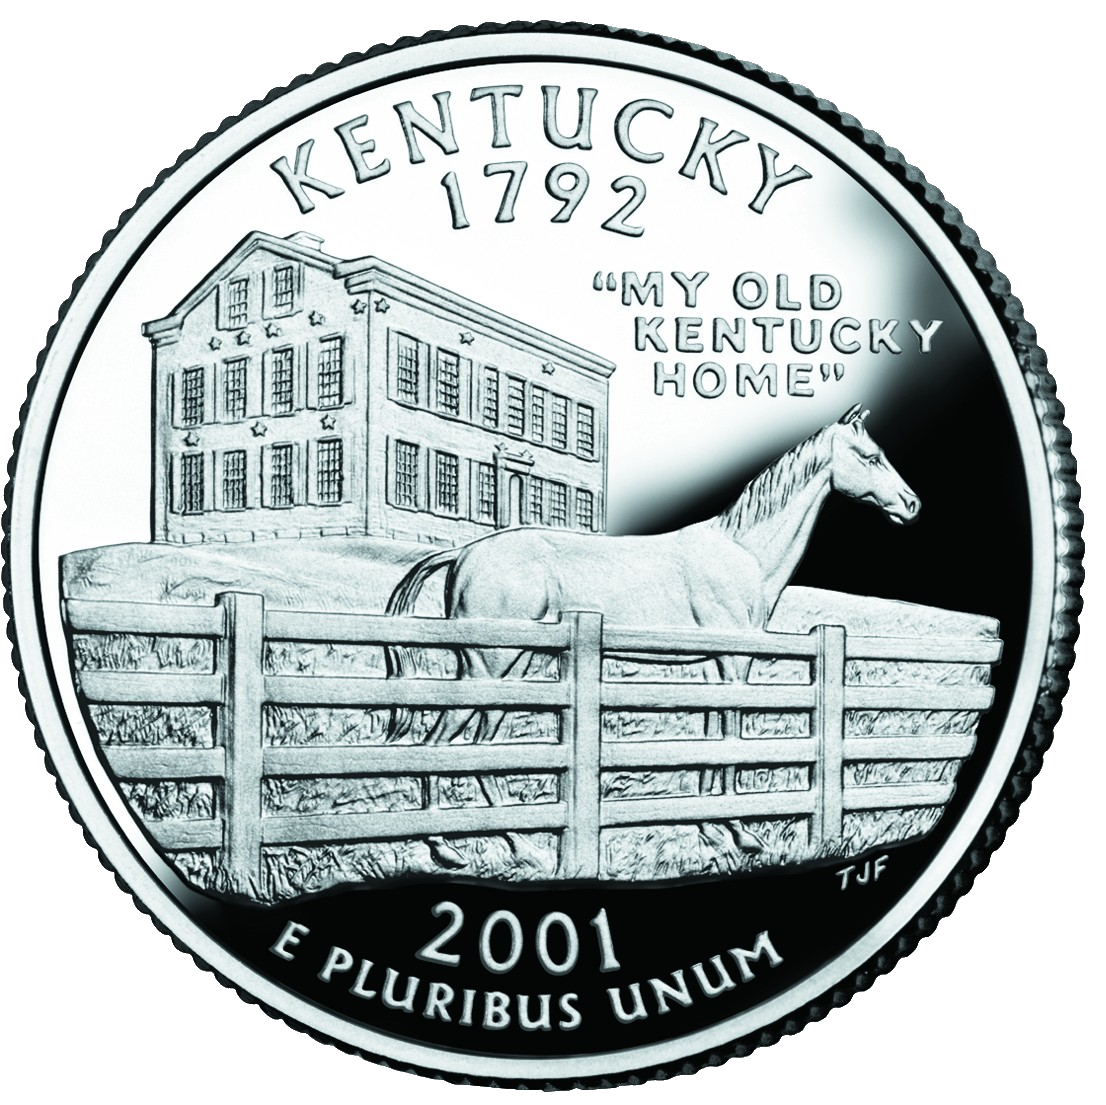 The Kentucky State Quarter features a Thoroughbred racehorse behind fence and the Bardstown Mansion, Federal Hill, with the caption: 